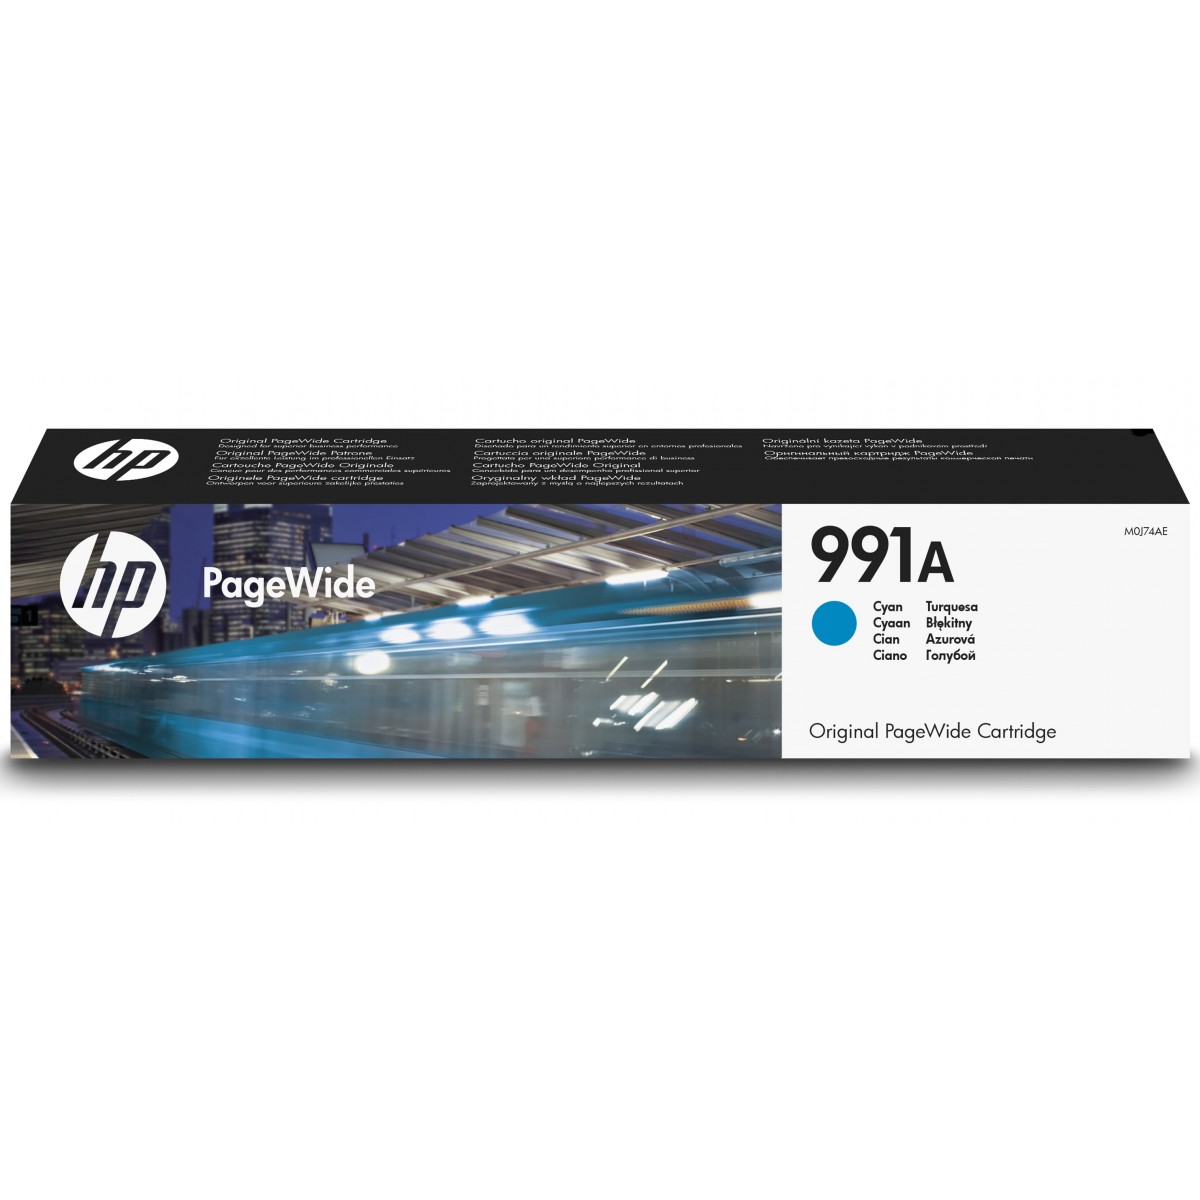 HP 991A - Original - Cyan - HP - HP PageWide Pro 750/772/777 - 97 ml - 8000 pages